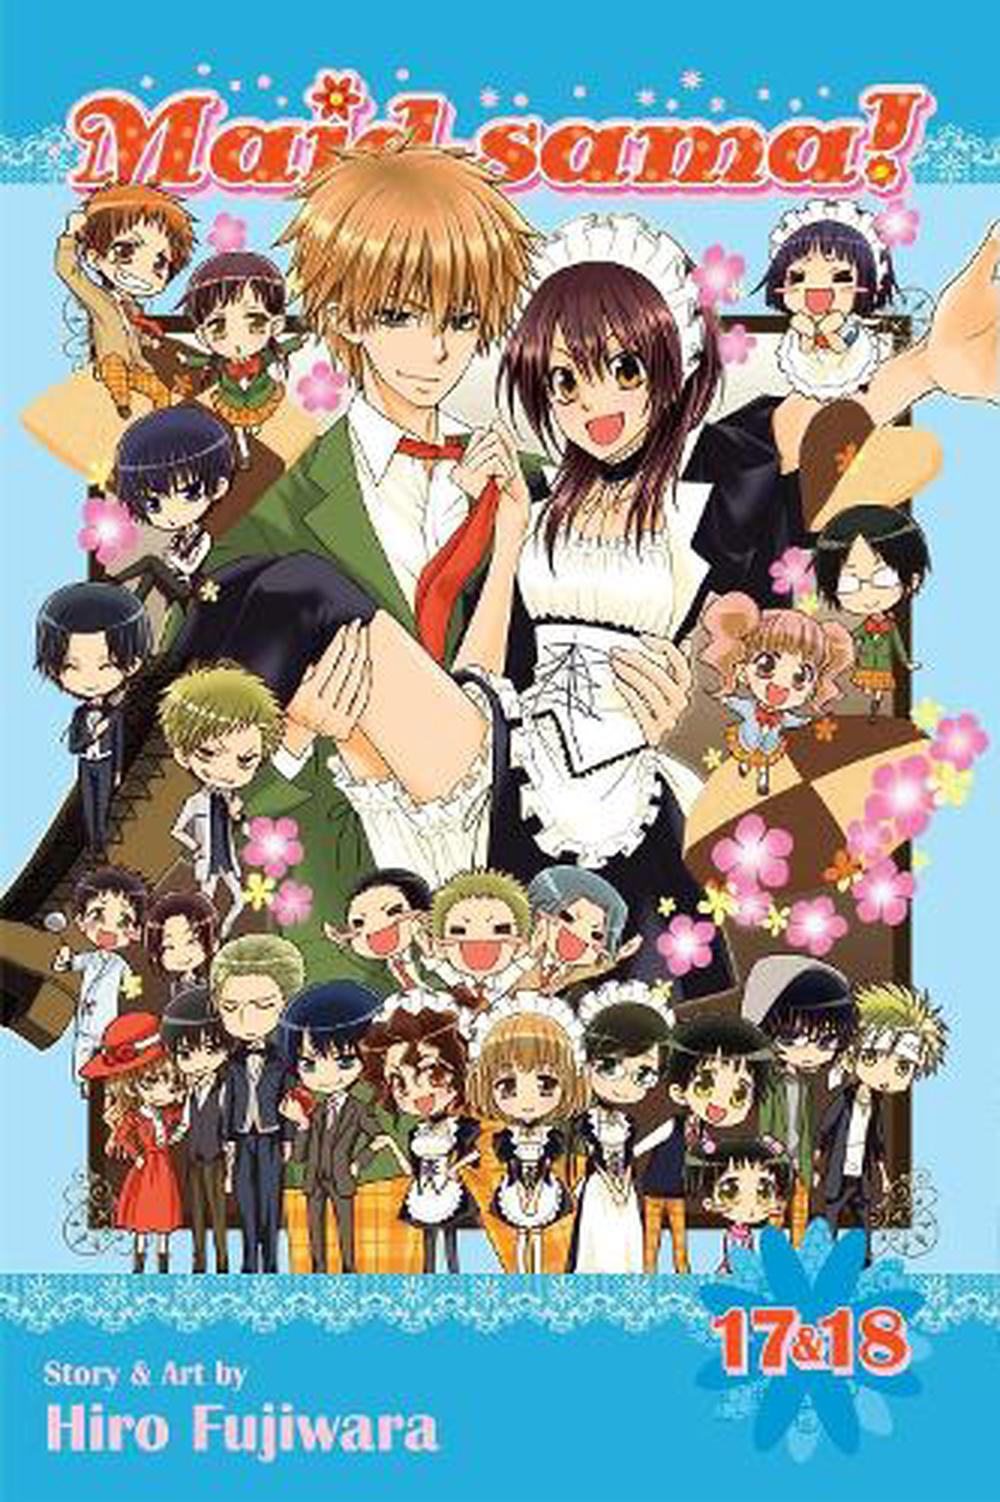 Maid Sama 2 In 1 Edition Vol 9 Includes Vols 17 And 18 By Hiro